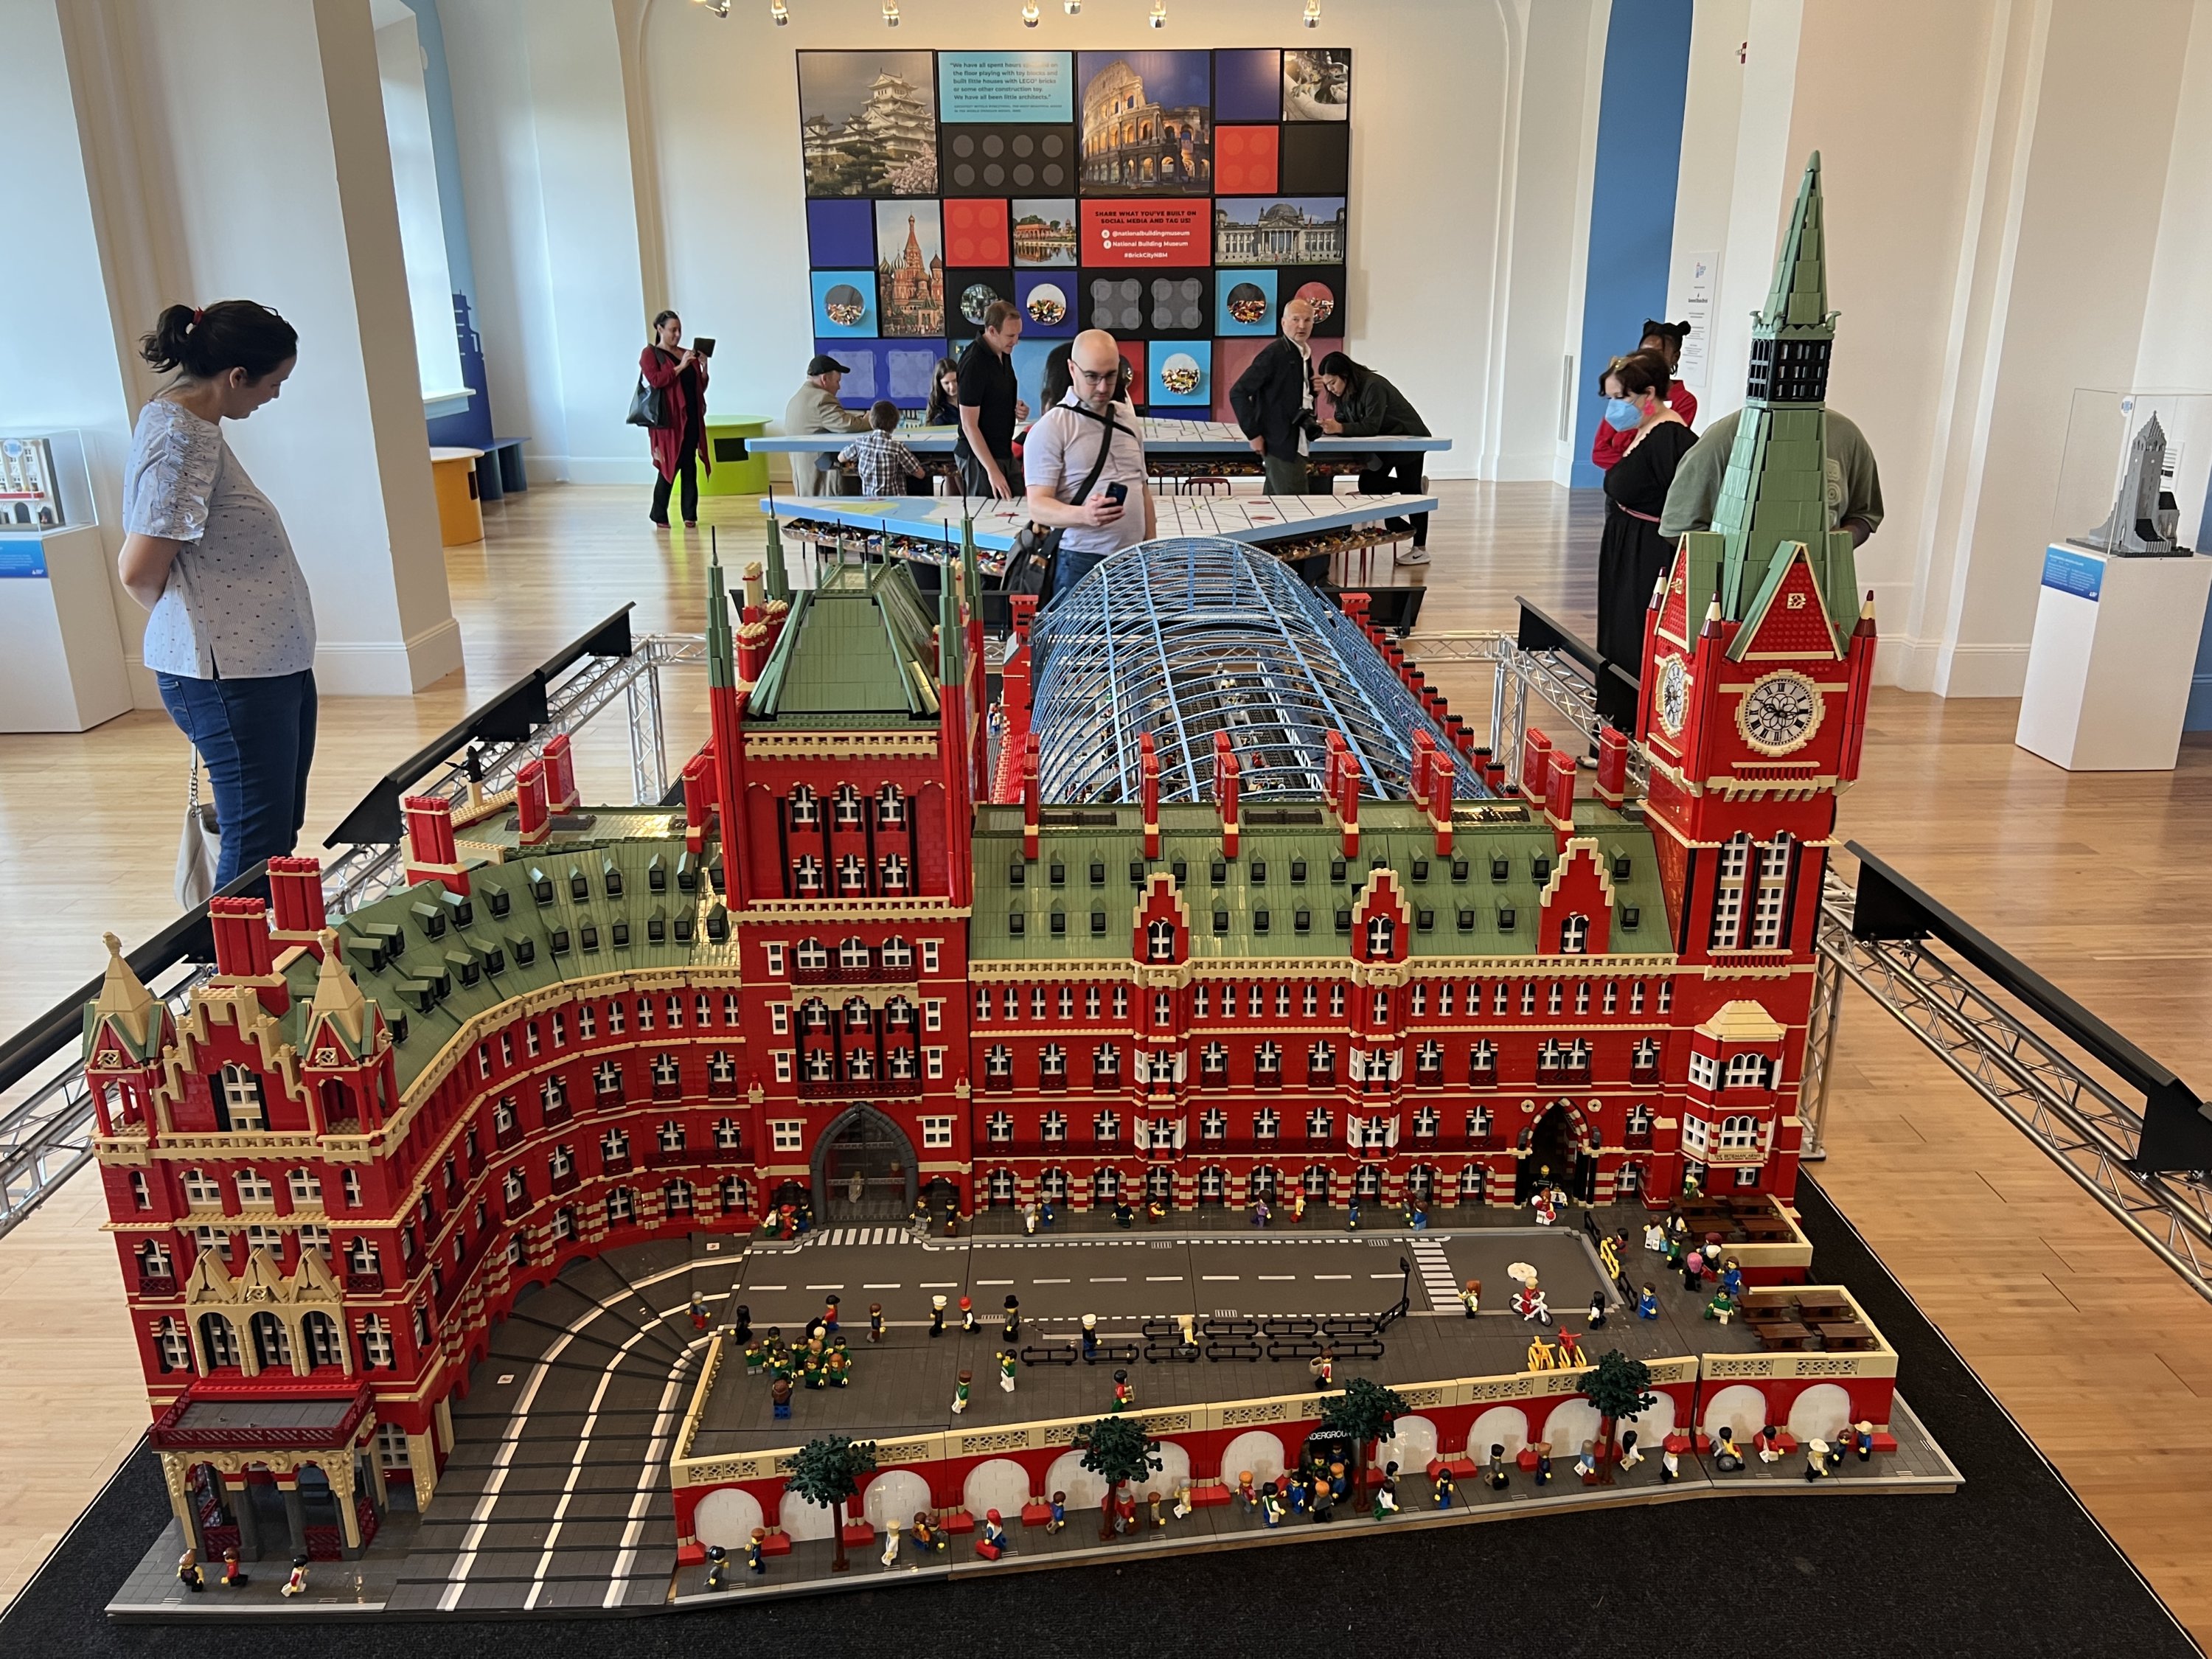 10 Amazing Lego Creations You'll See at the National Building Museum's  Newest Exhibit